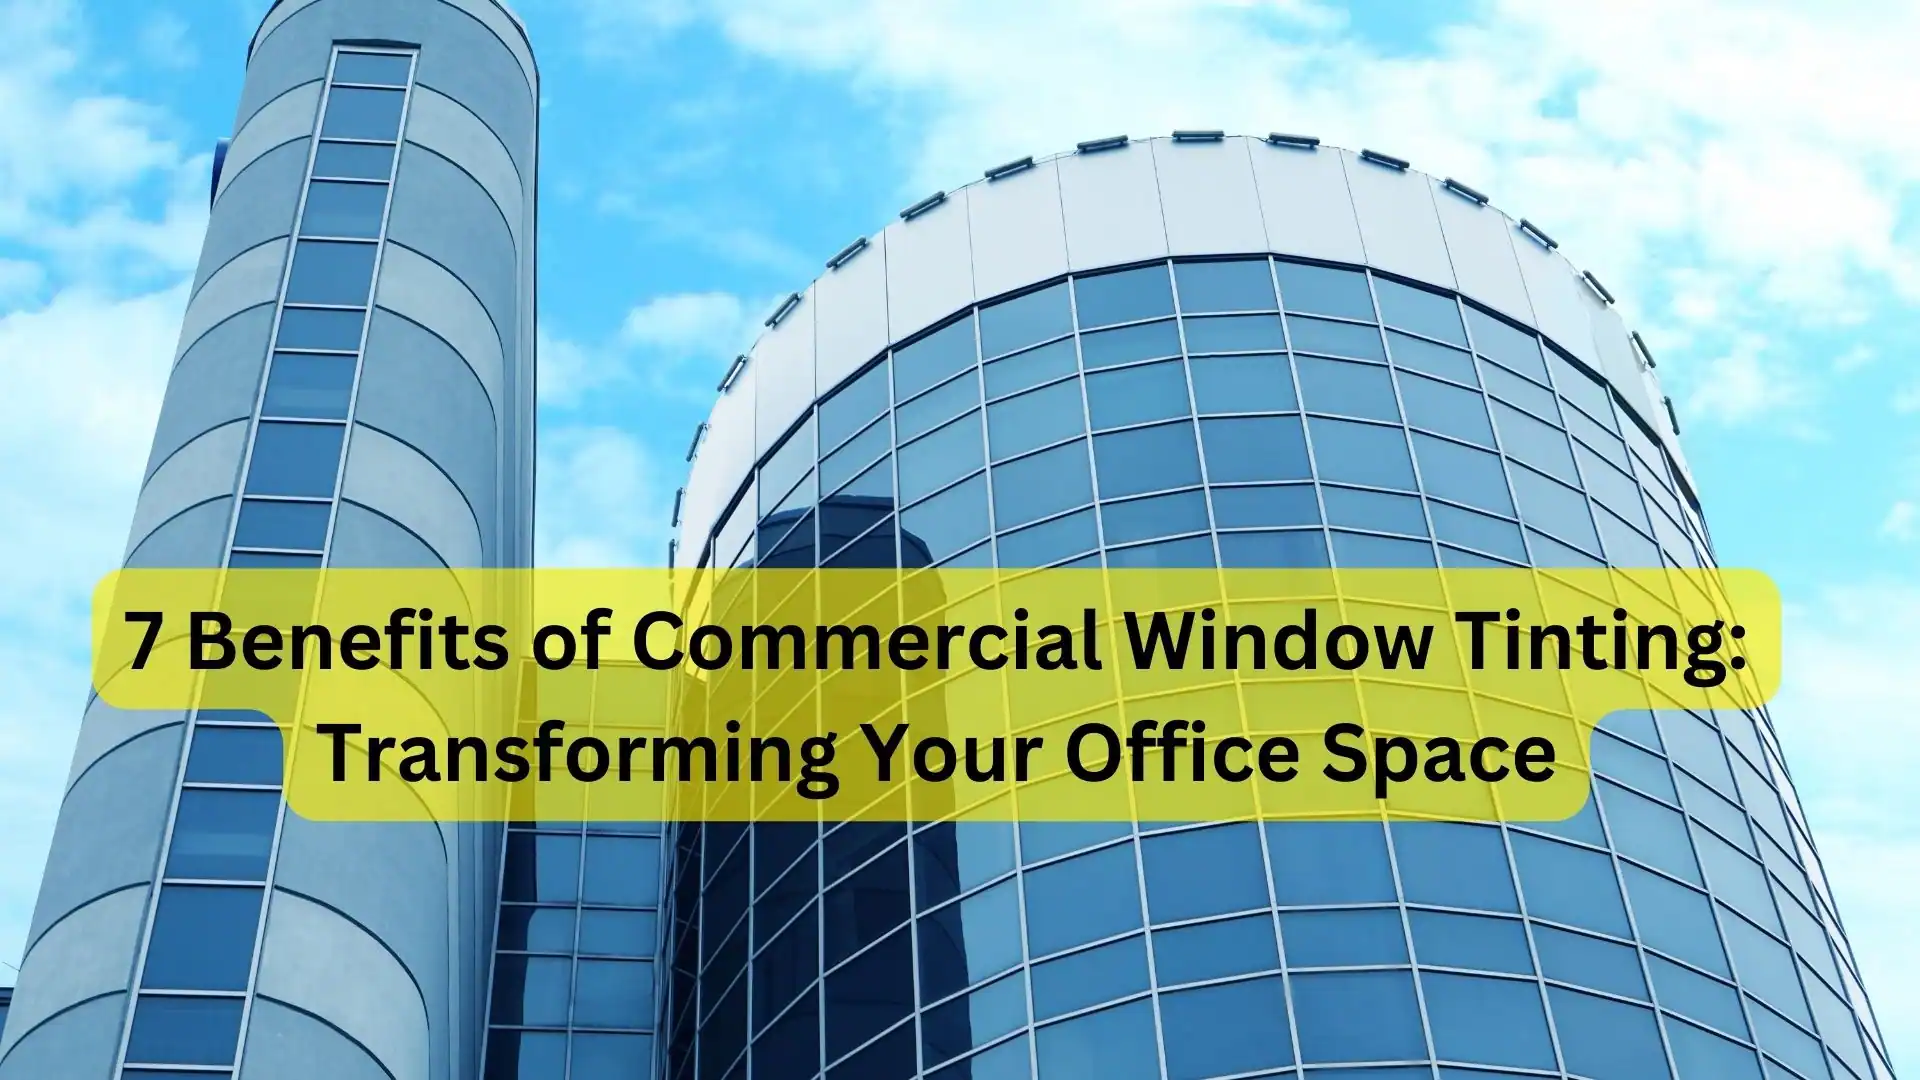 7 Benefits of Commercial Window Tinting: Transforming Your Office Space